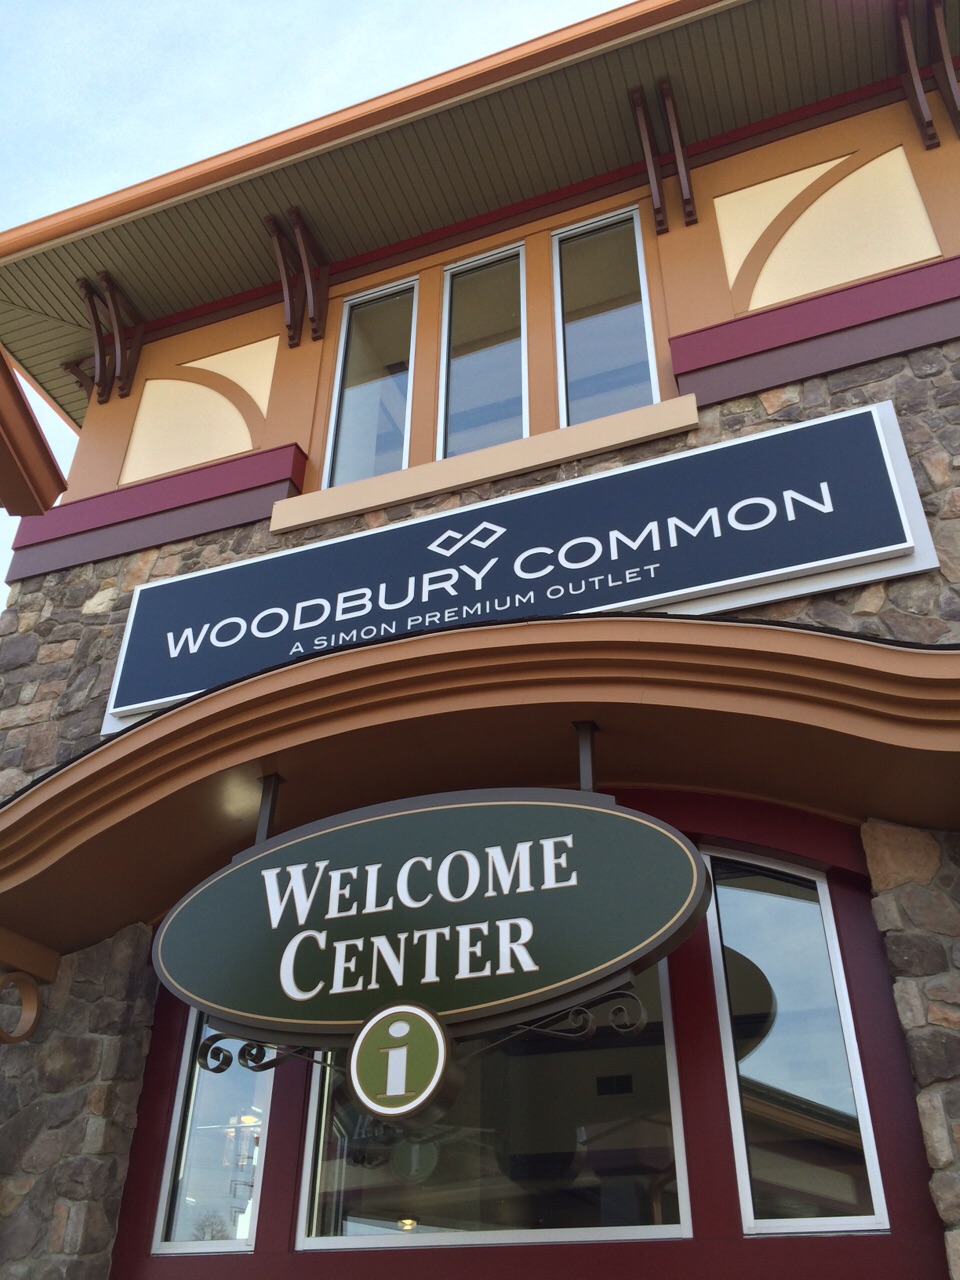 Woodbury Common Premium Outlets - During the holidays, there's no